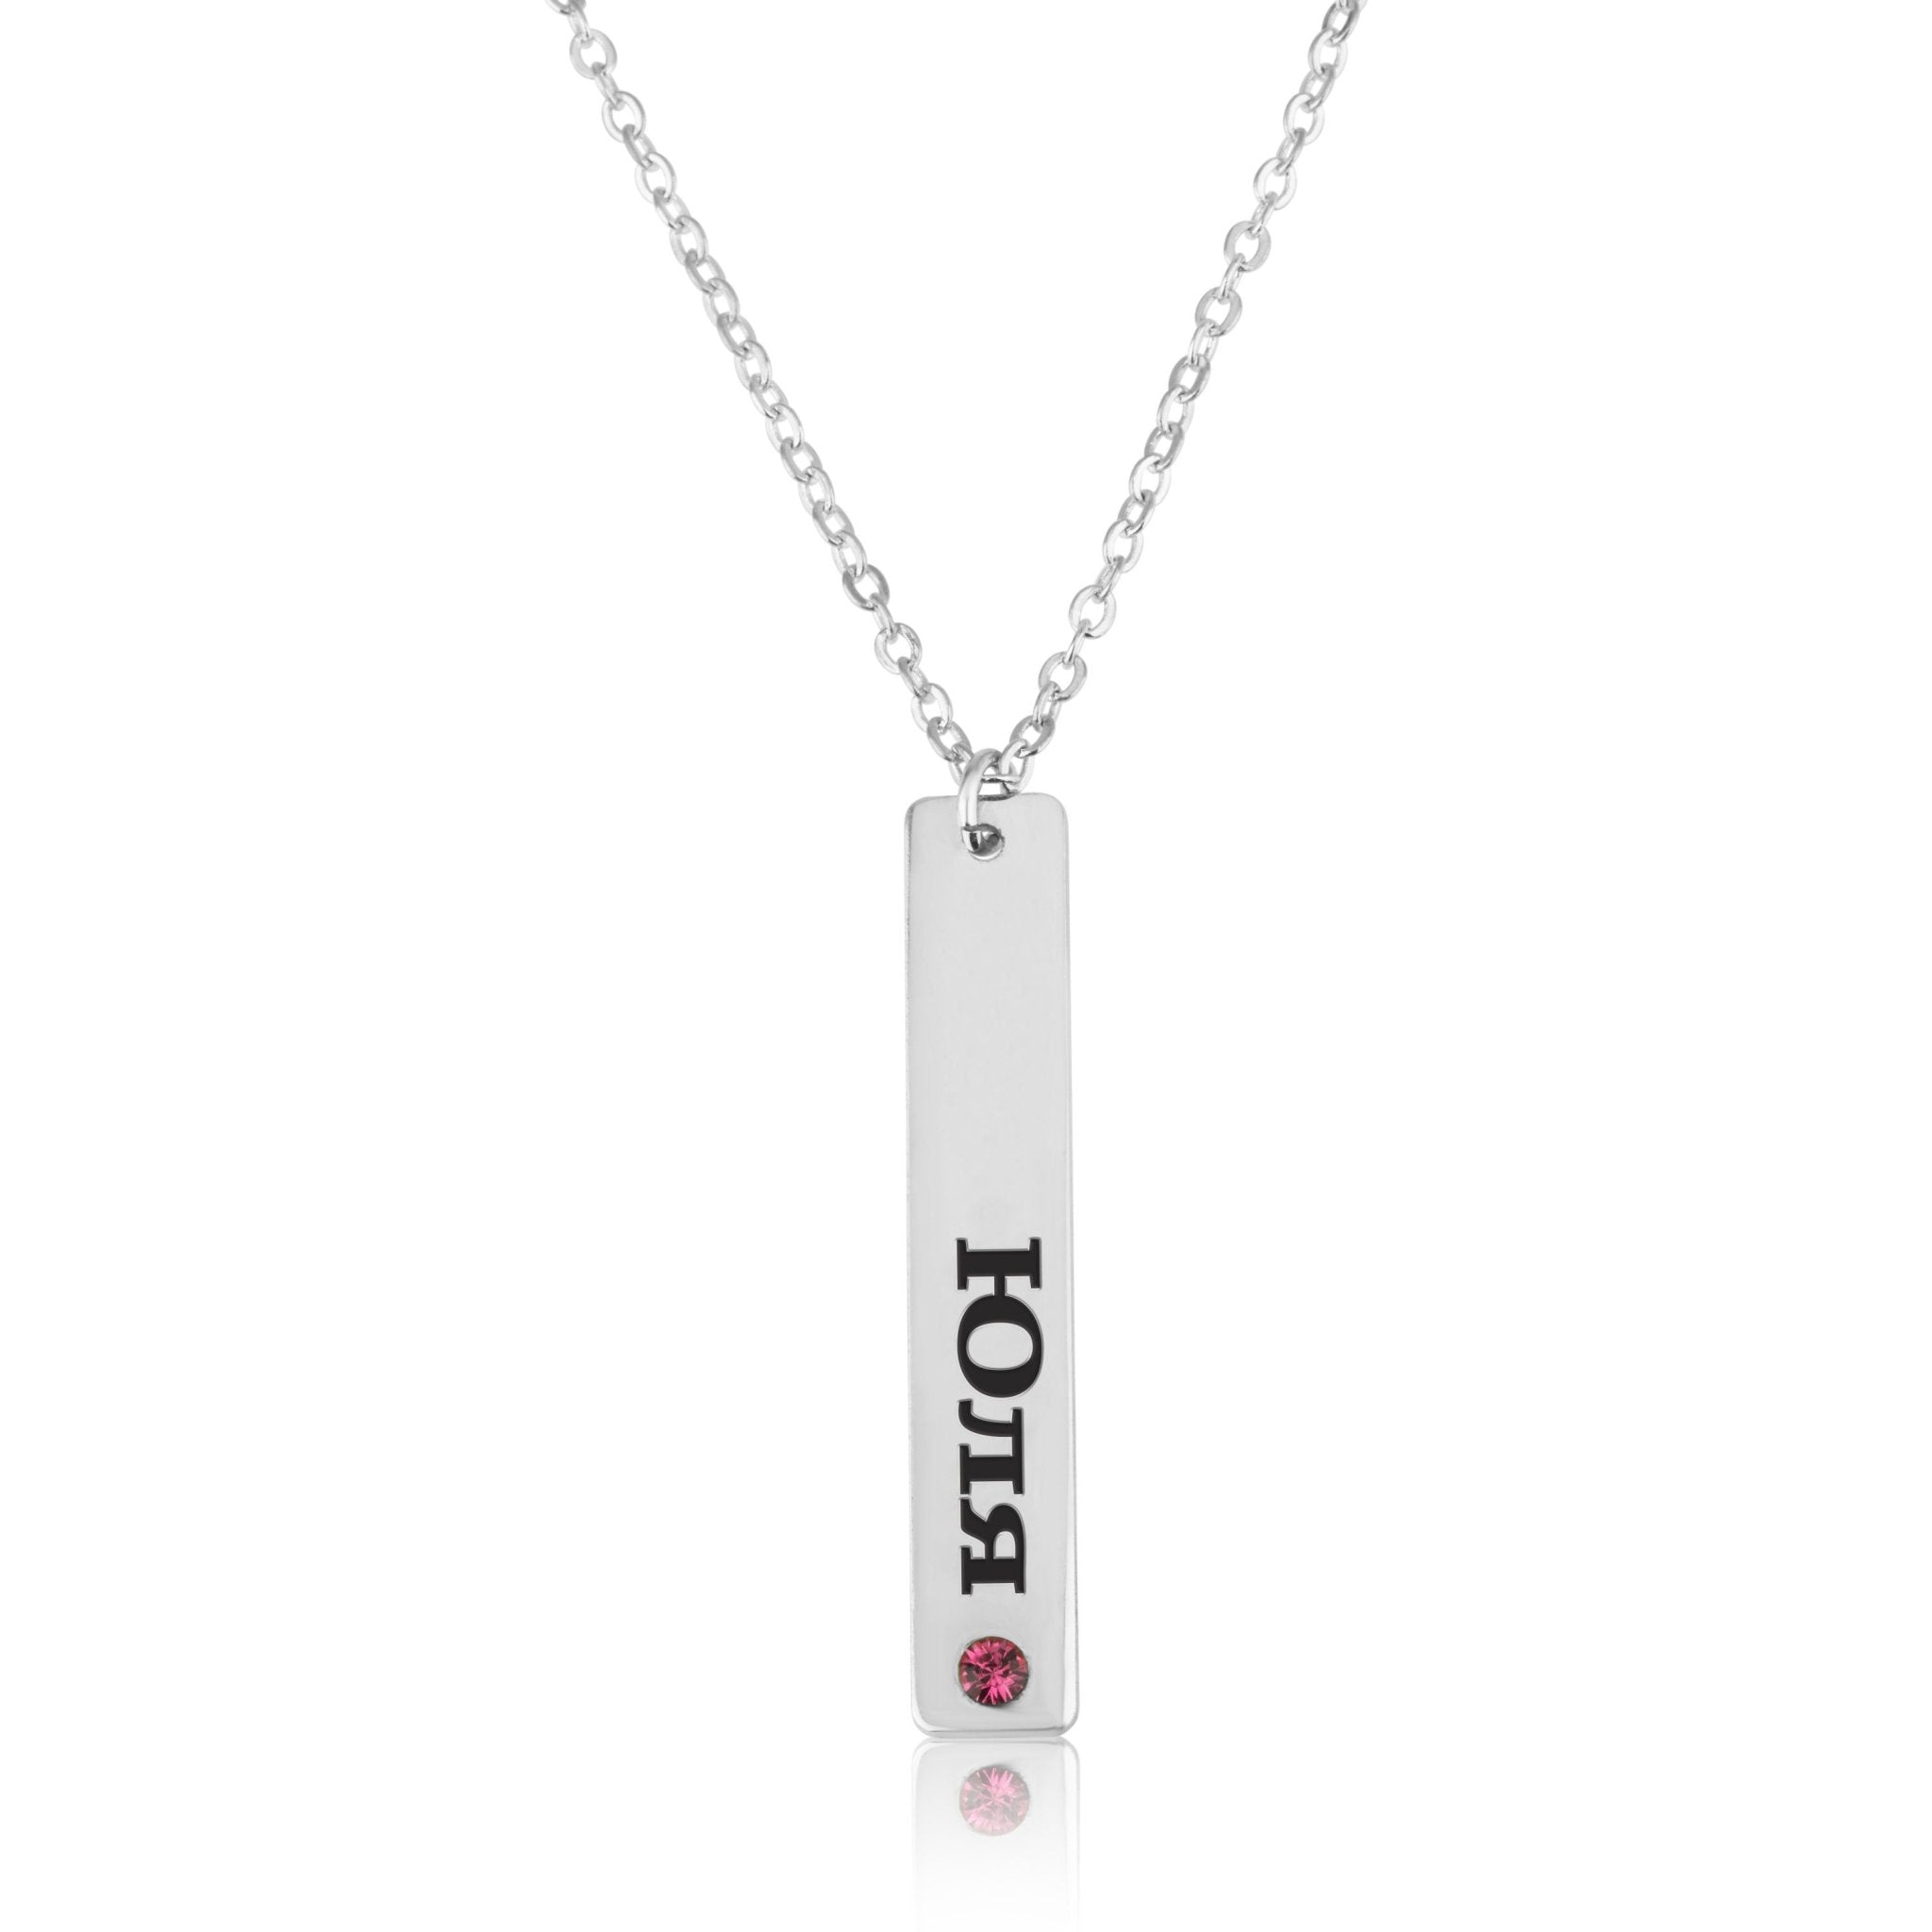 Mother's Birthstone Horizontal Bar Necklace with Handset Crystals -  Silverado Jewelry